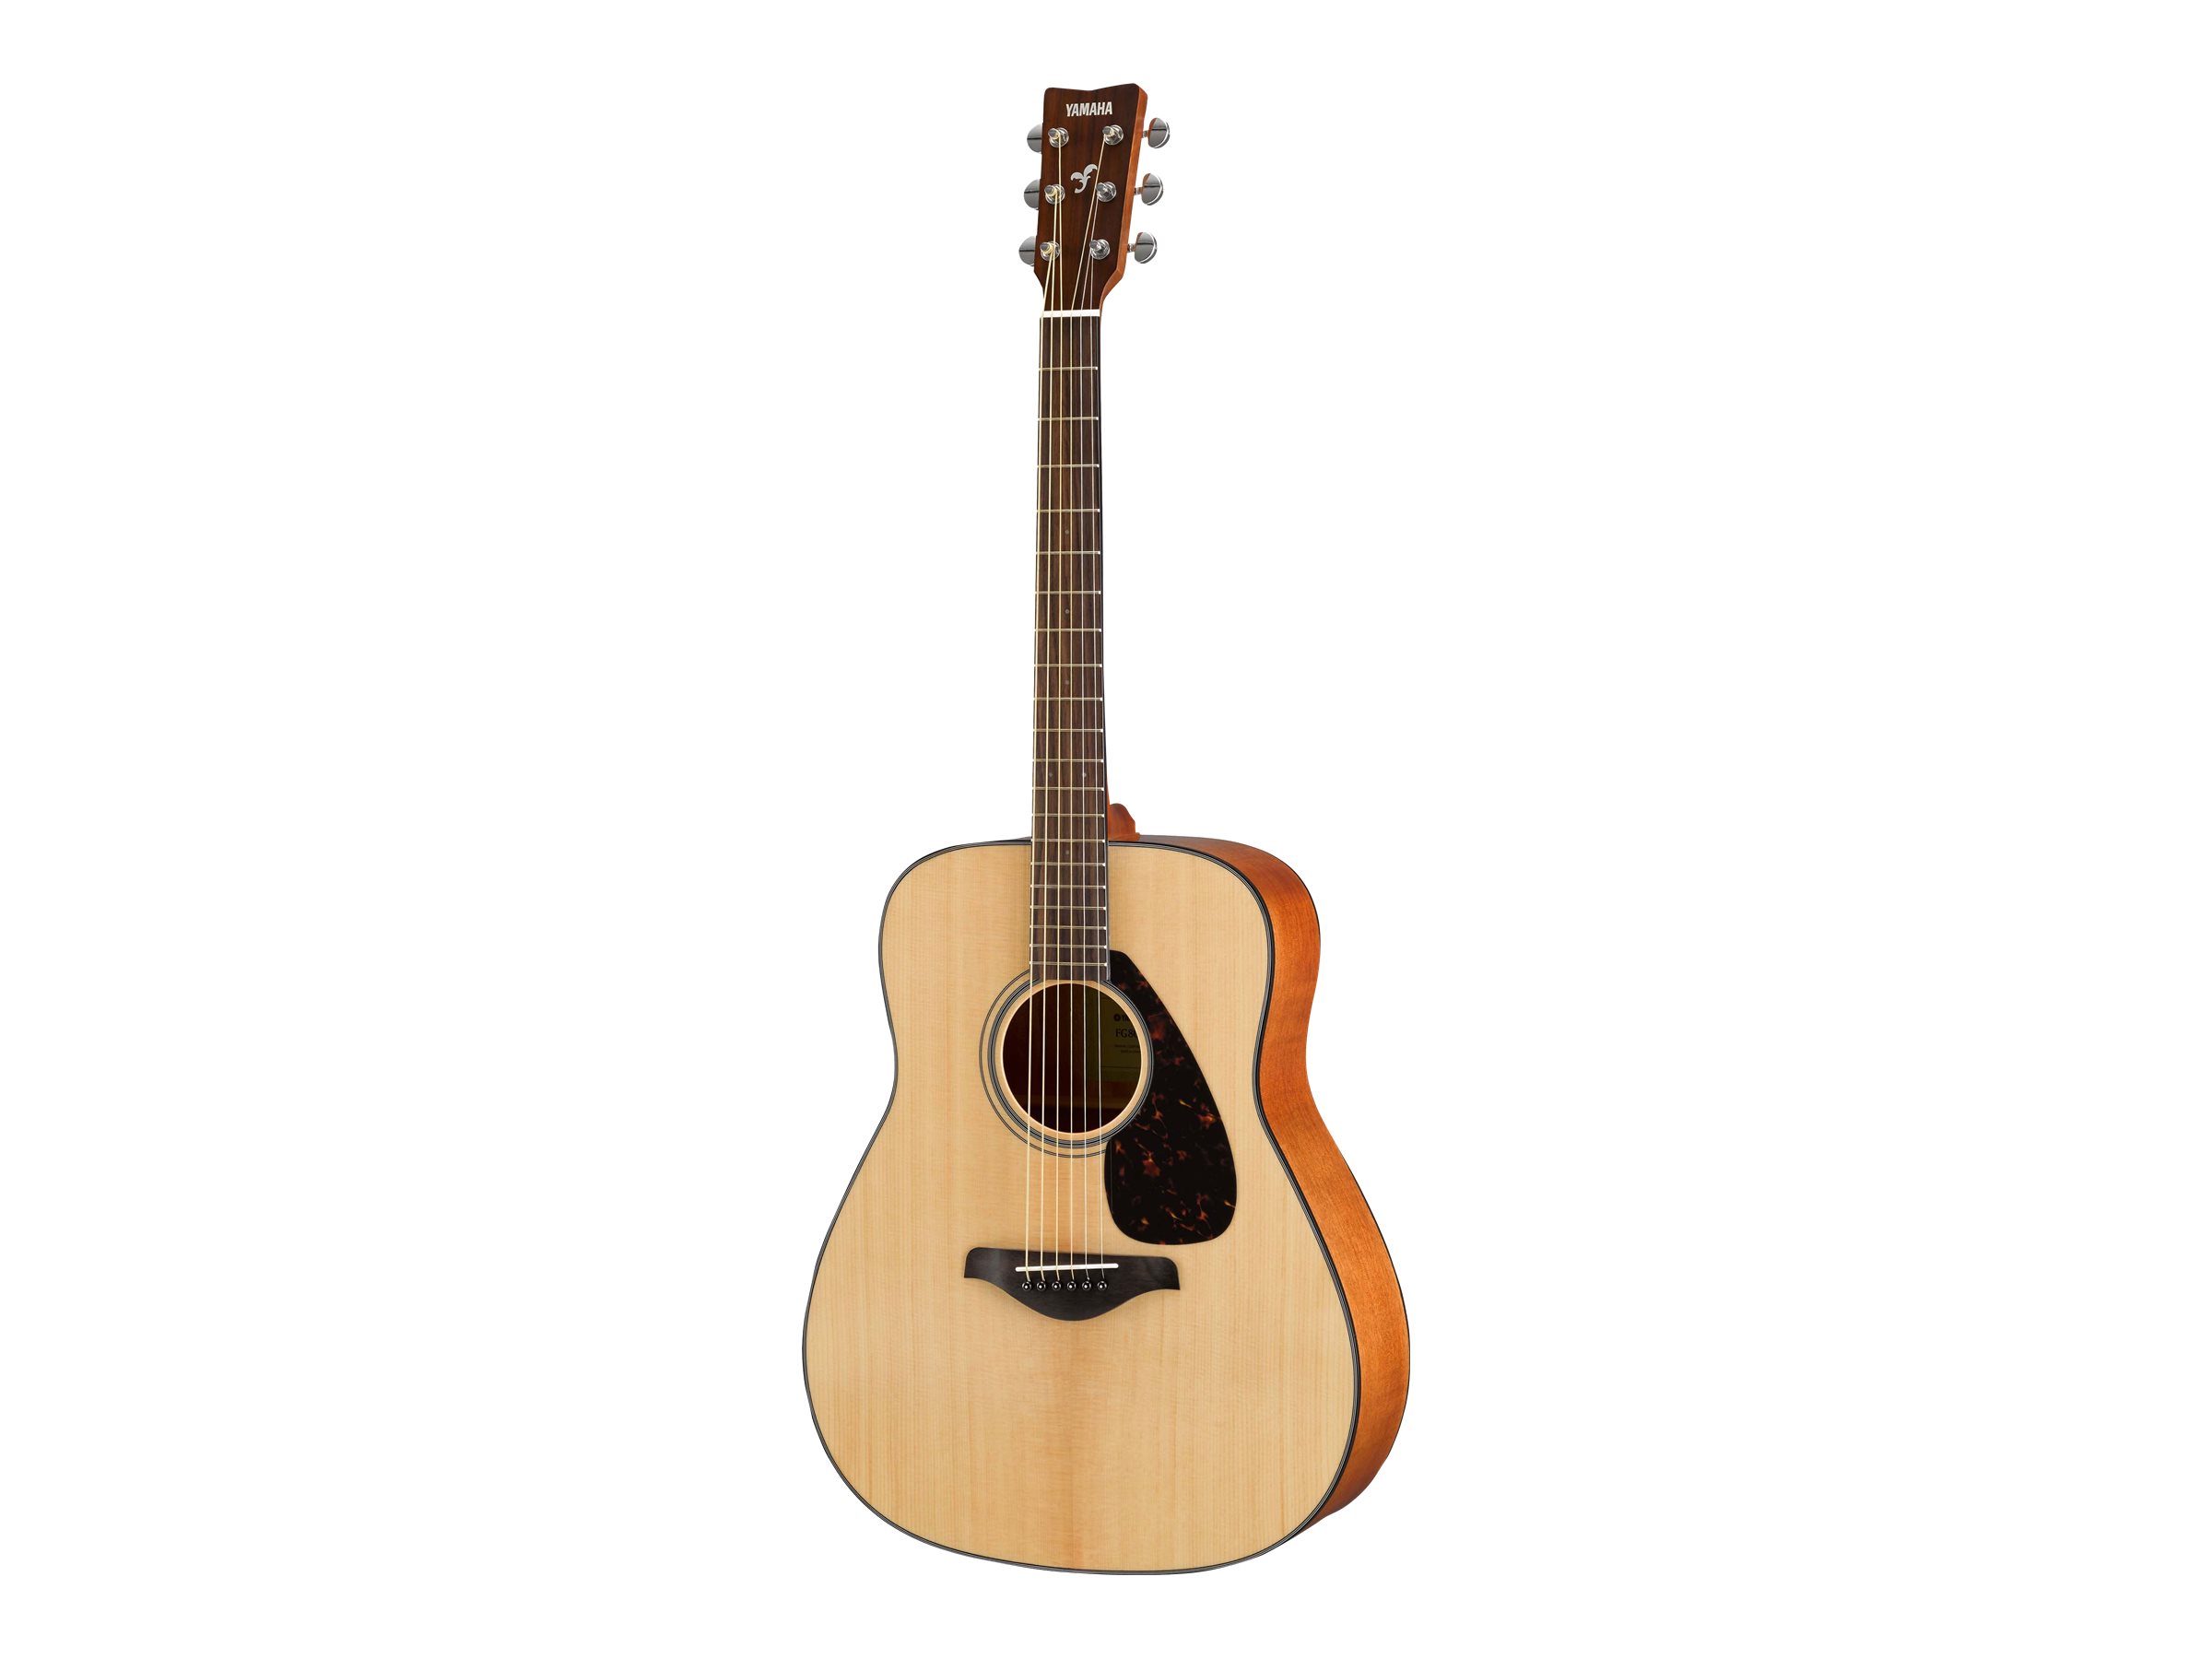 Yamaha FG Series FG800 Acoustic Guitar Dreadnought Top Solid Spruce Back Nato, Okoume - image 1 of 4